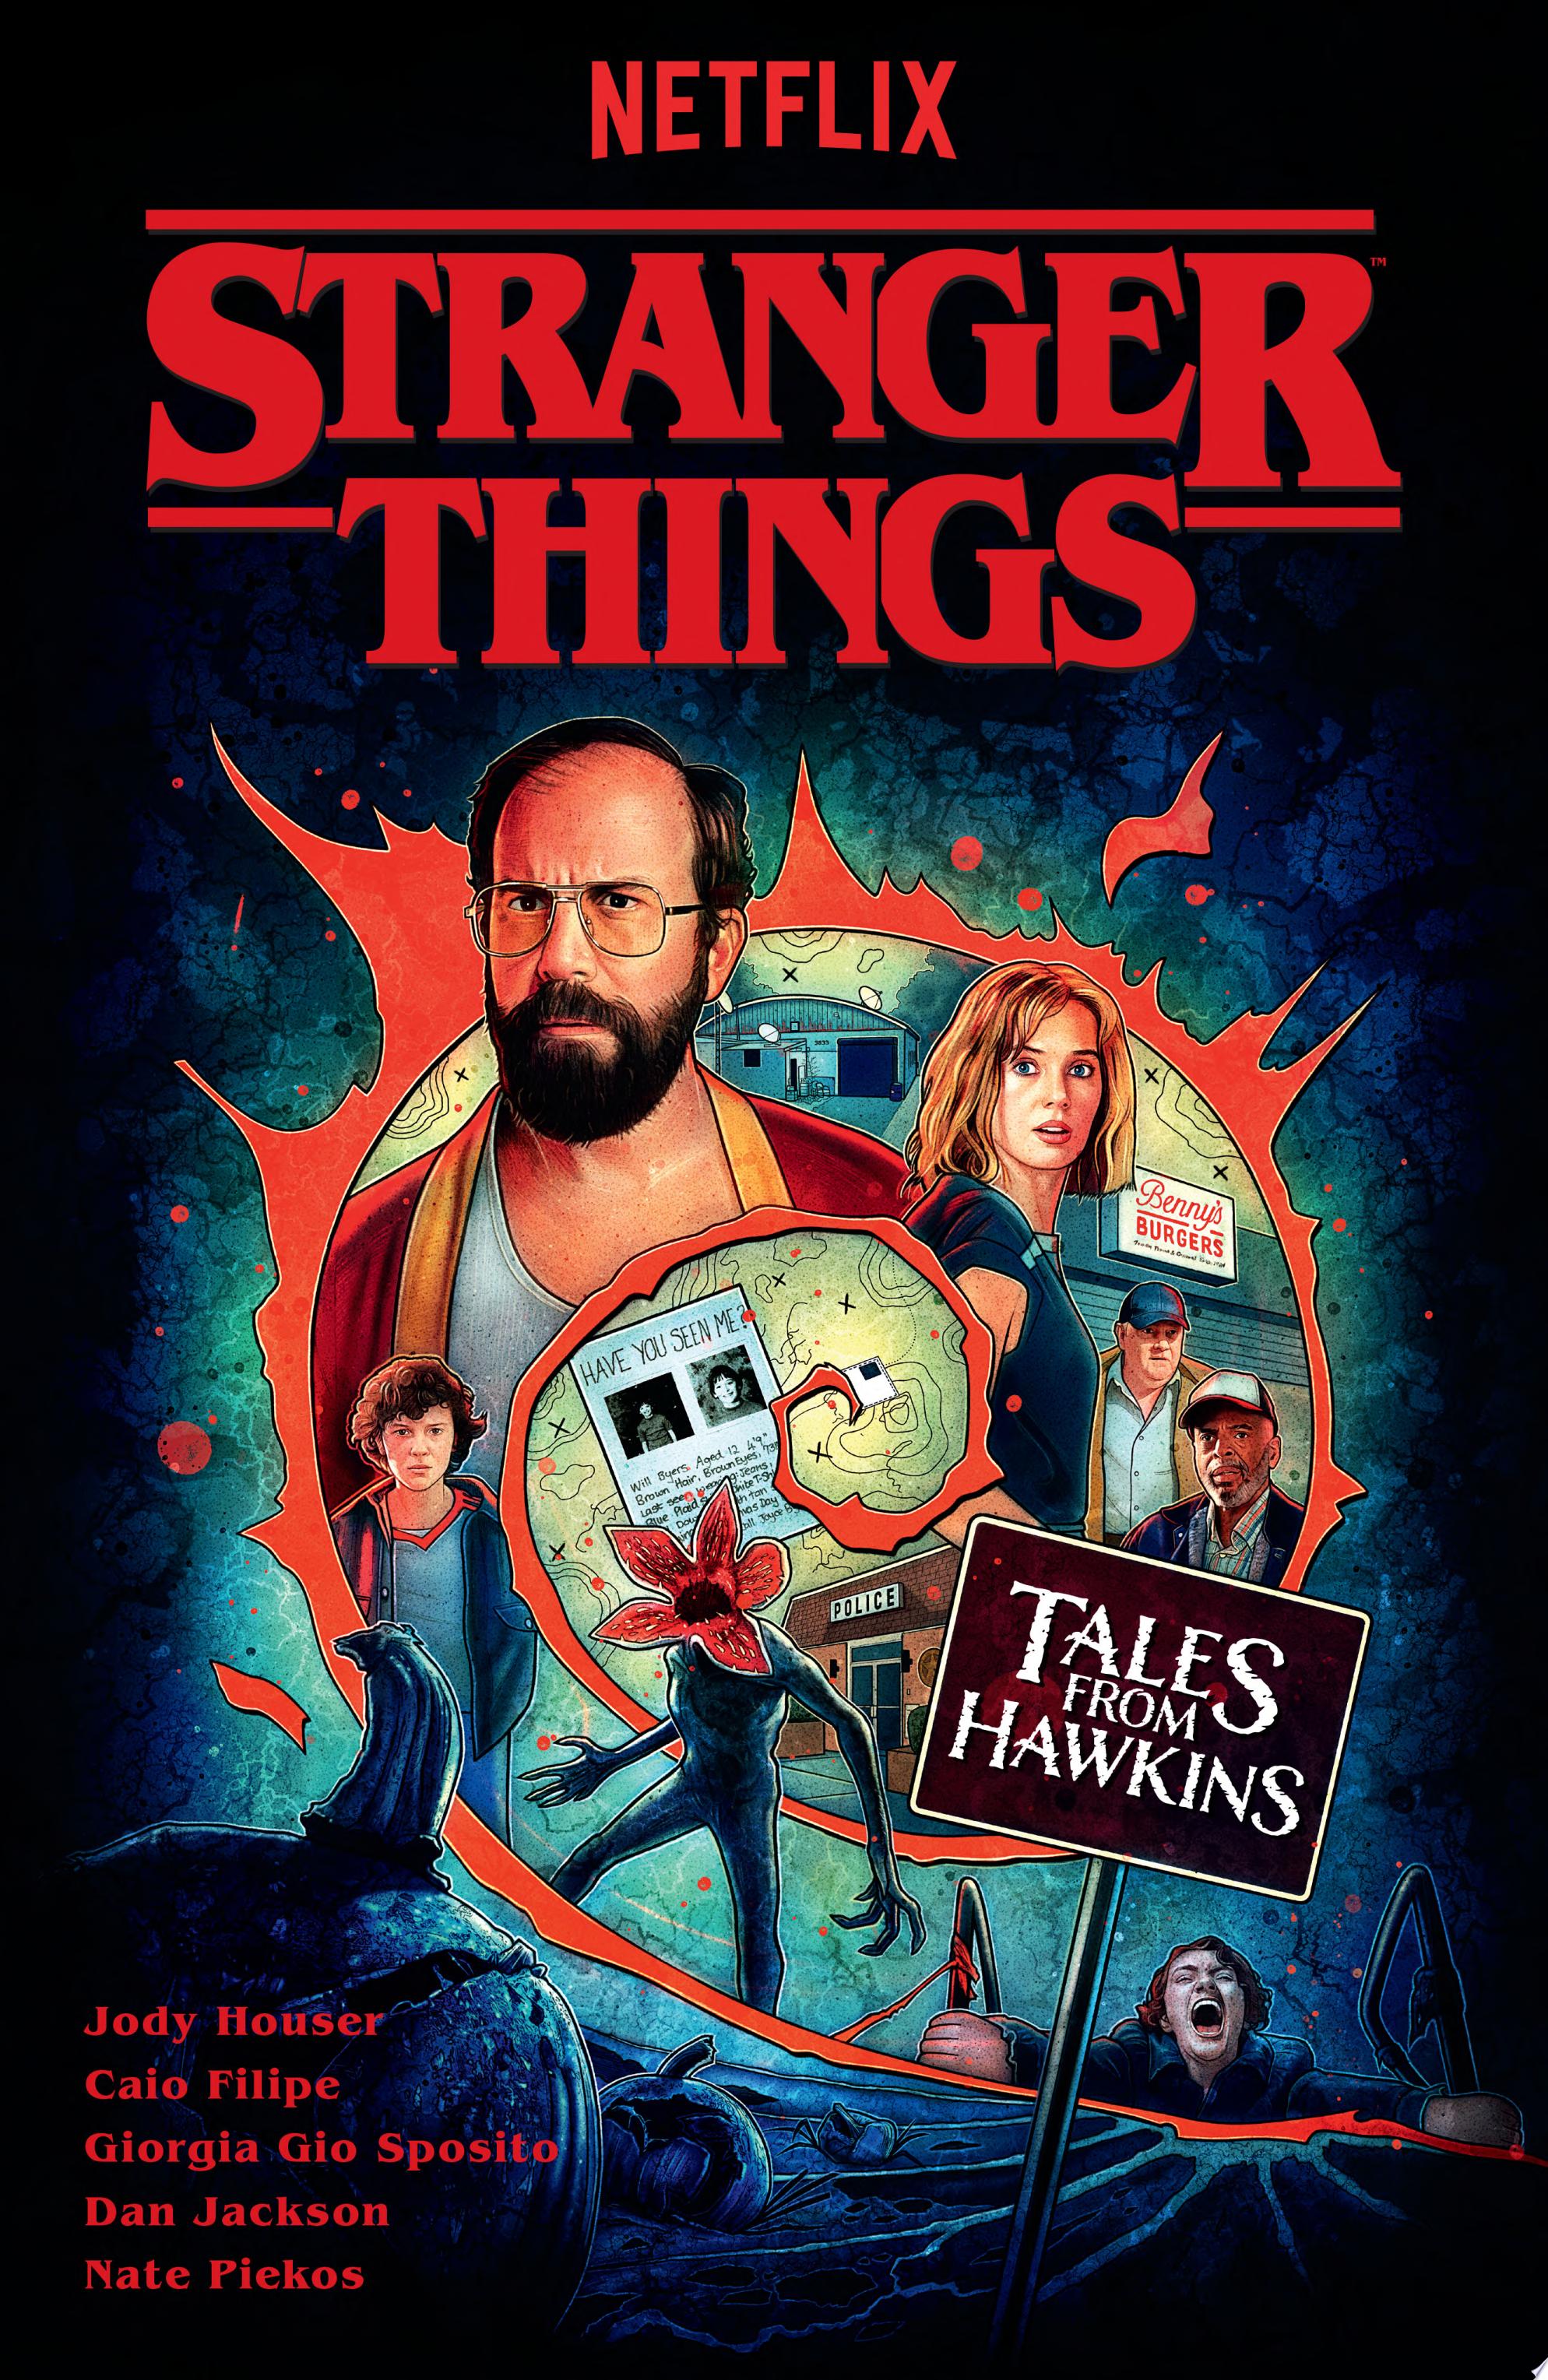 Image for "Stranger Things: Tales from Hawkins (Graphic Novel)"